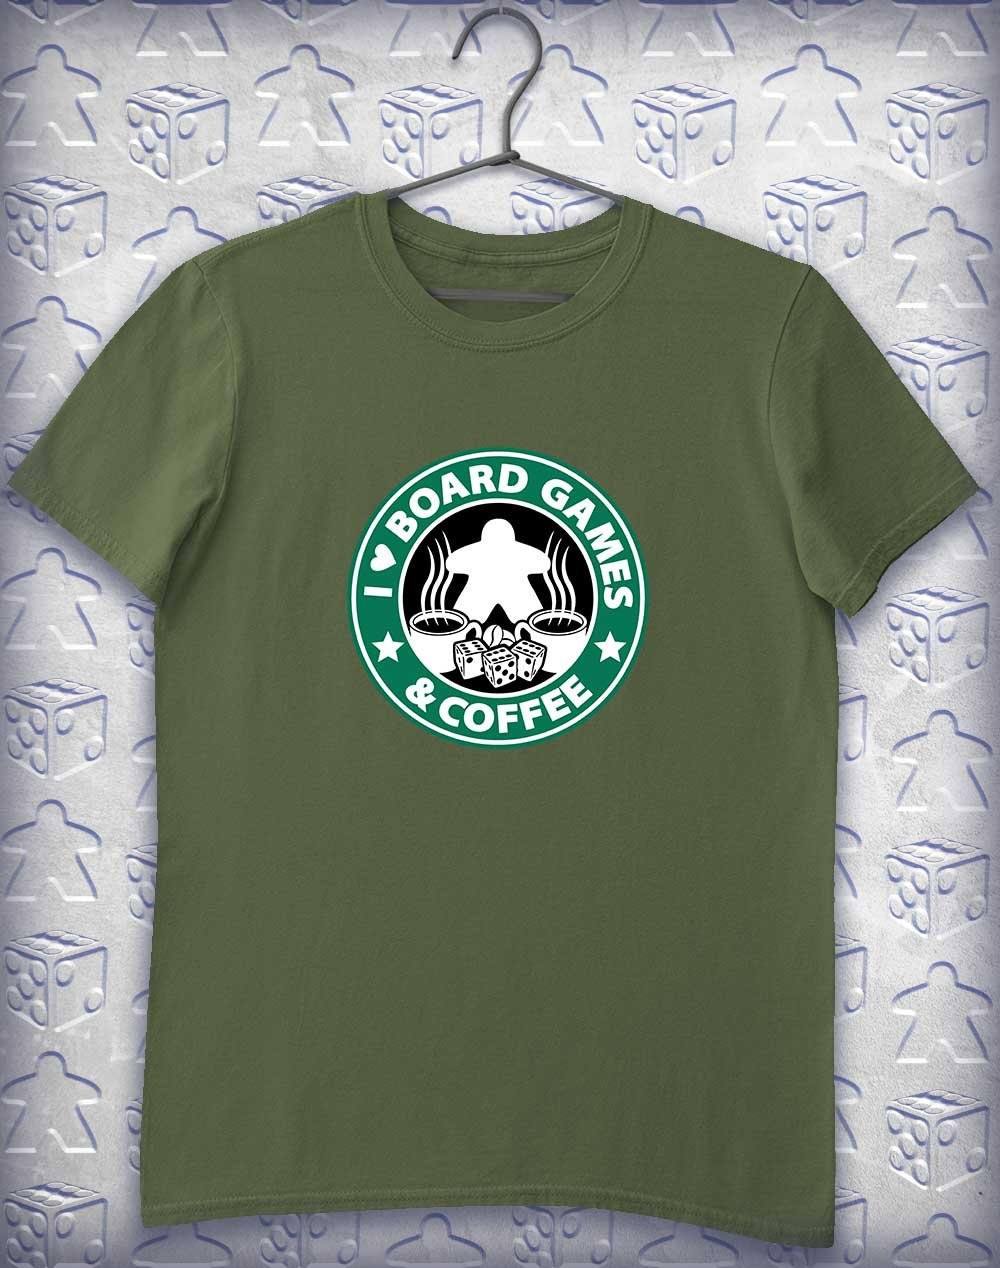 Board Games & Coffee Alphagamer T Shirt S / Military Green  - Off World Tees